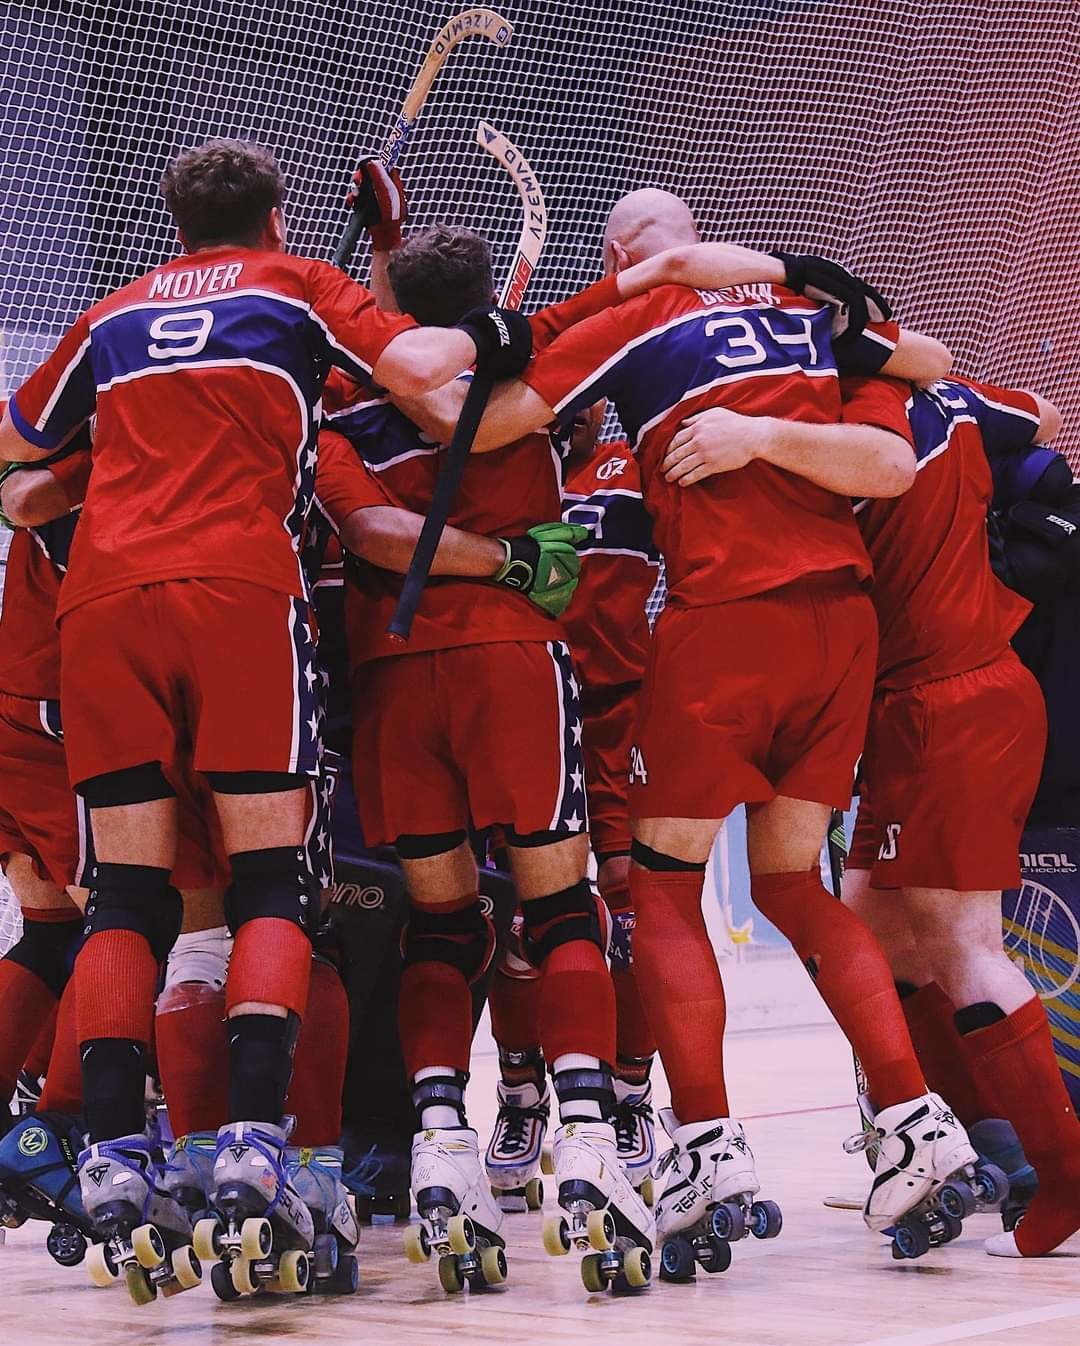 Team USA huddles before a roller hockey match at the World Roller Games in San Juan, Argentina earlier this fall. Photo courtesy of Jennifer Locy.